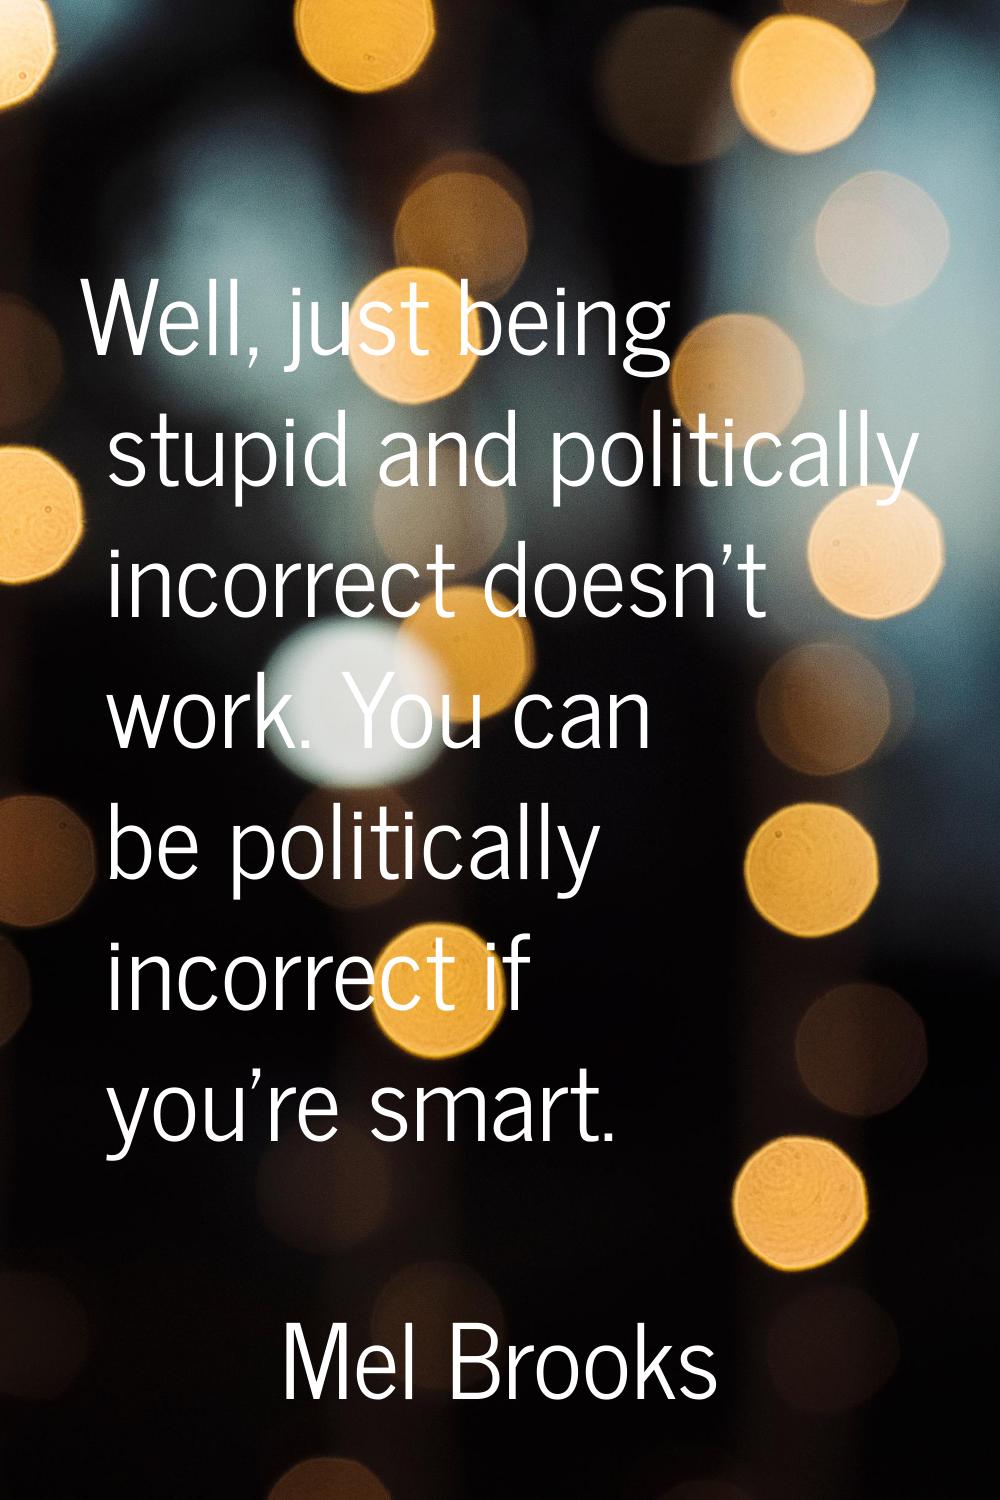 Well, just being stupid and politically incorrect doesn't work. You can be politically incorrect if